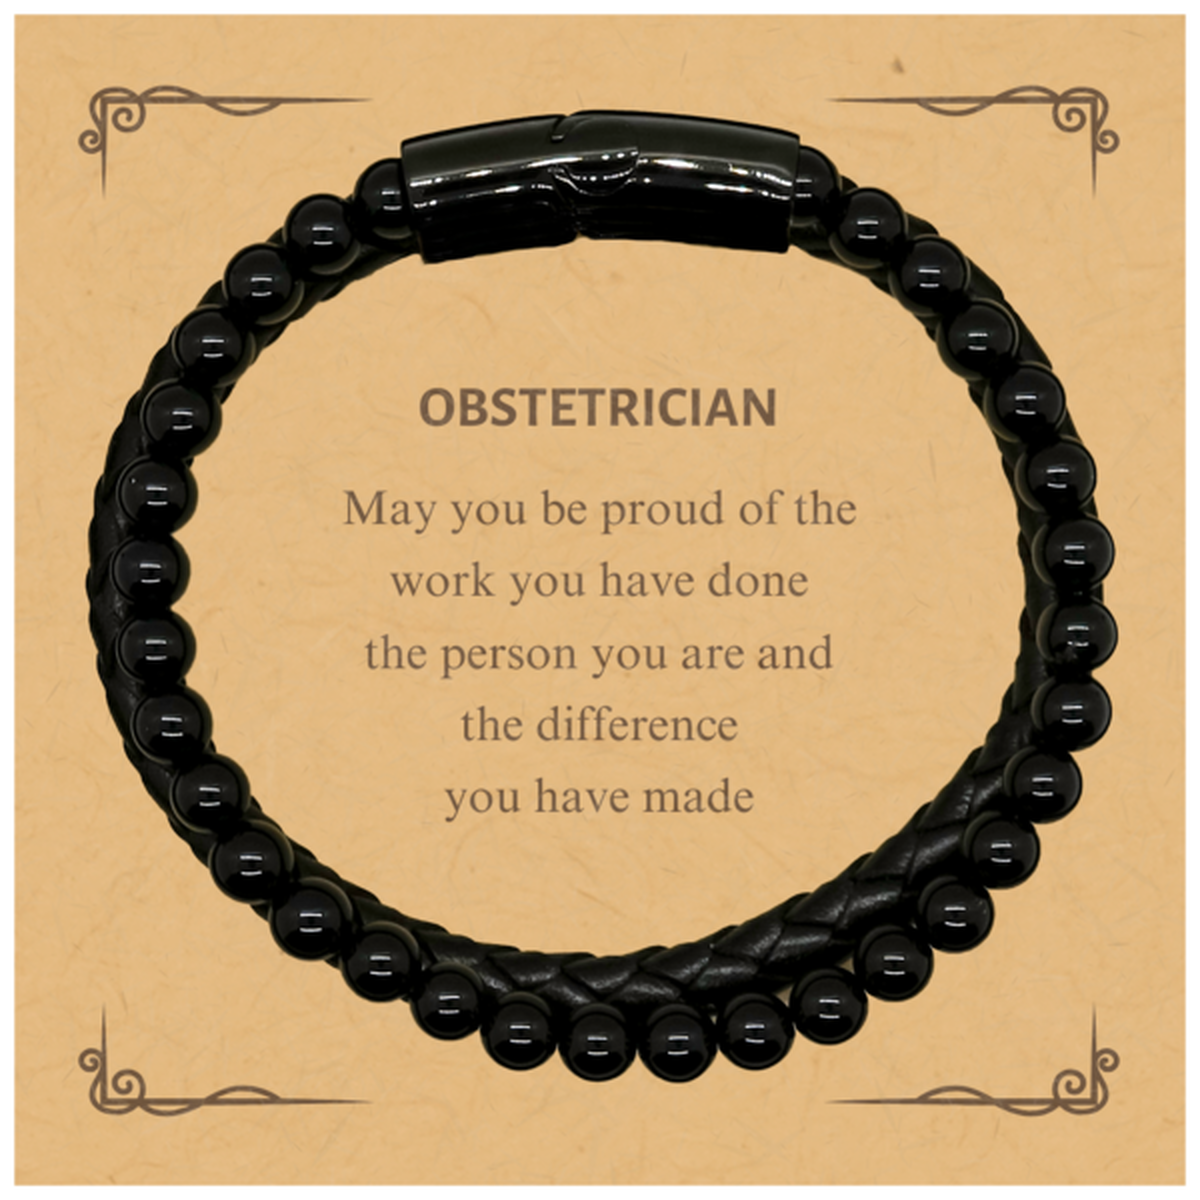 Obstetrician May you be proud of the work you have done, Retirement Obstetrician Stone Leather Bracelets for Colleague Appreciation Gifts Amazing for Obstetrician